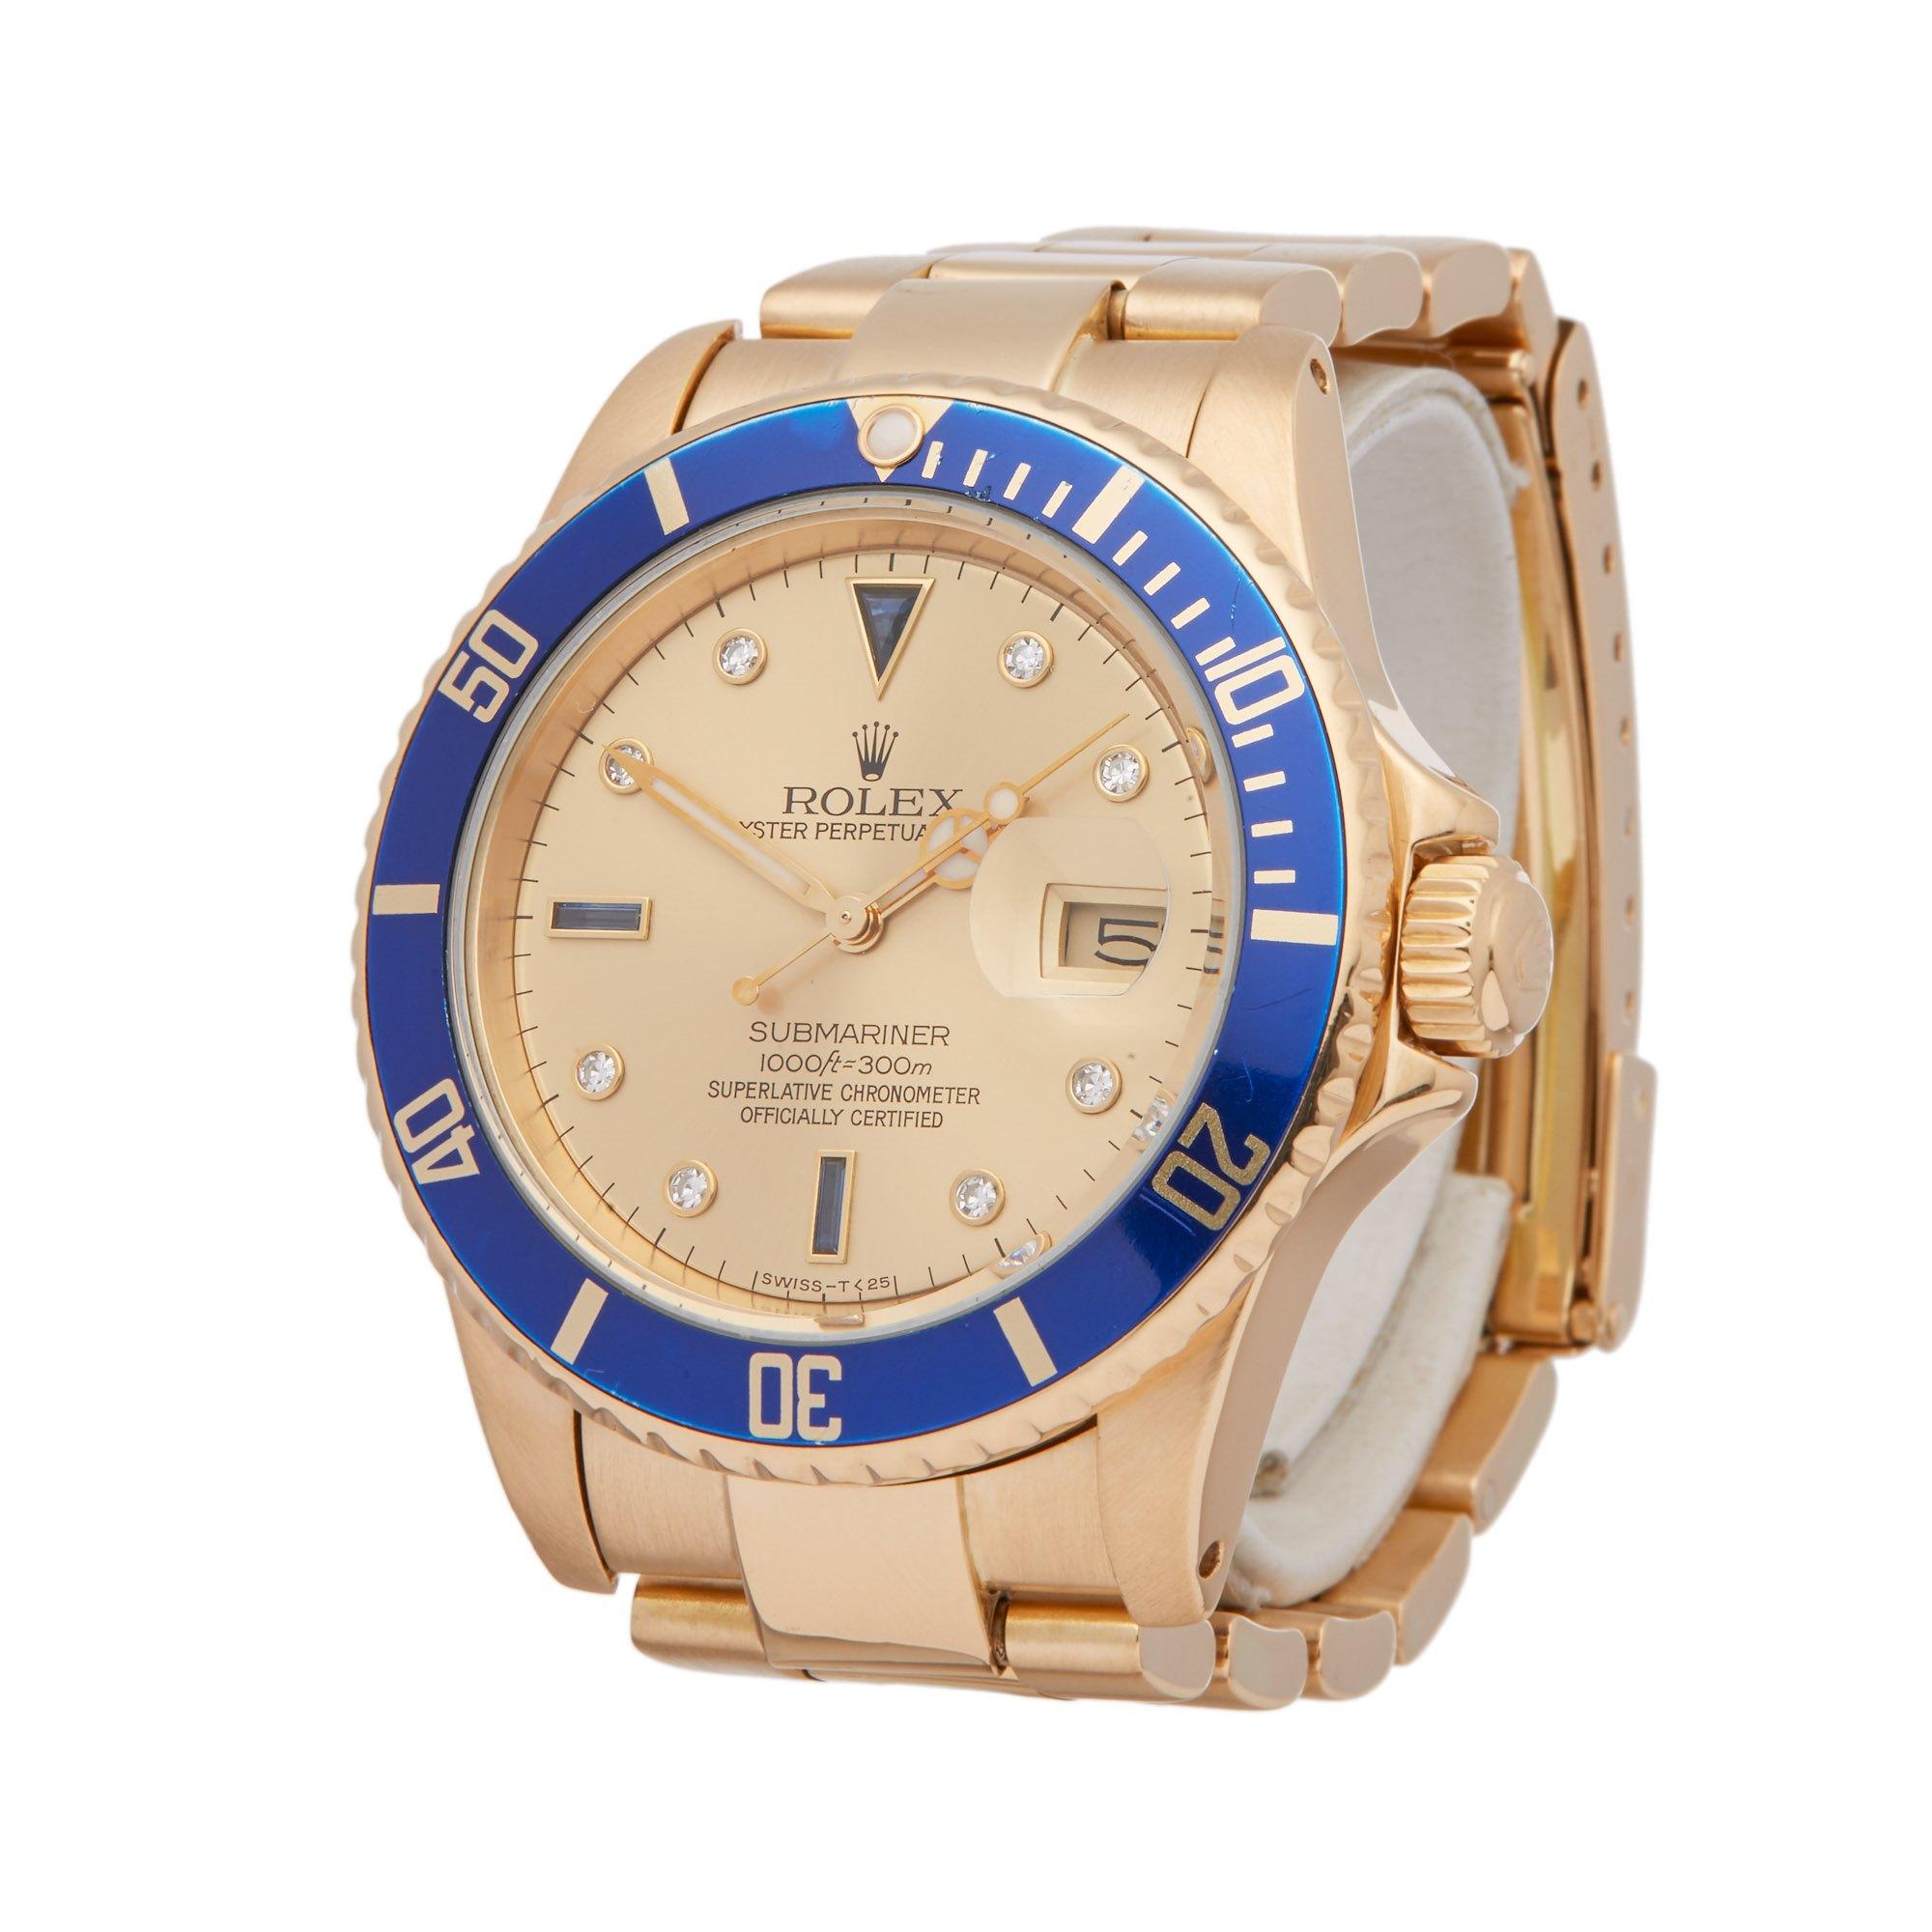 Xupes Reference: W007183
Manufacturer: Rolex
Model: Submariner
Model Variant: 
Model Number: 16808
Age: 1984
Gender: Men
Complete With: Rolex Box 
Dial: Gold Serti
Glass: Sapphire Crystal
Case Size: 40mm
Case Material: Yellow Gold
Strap Material: